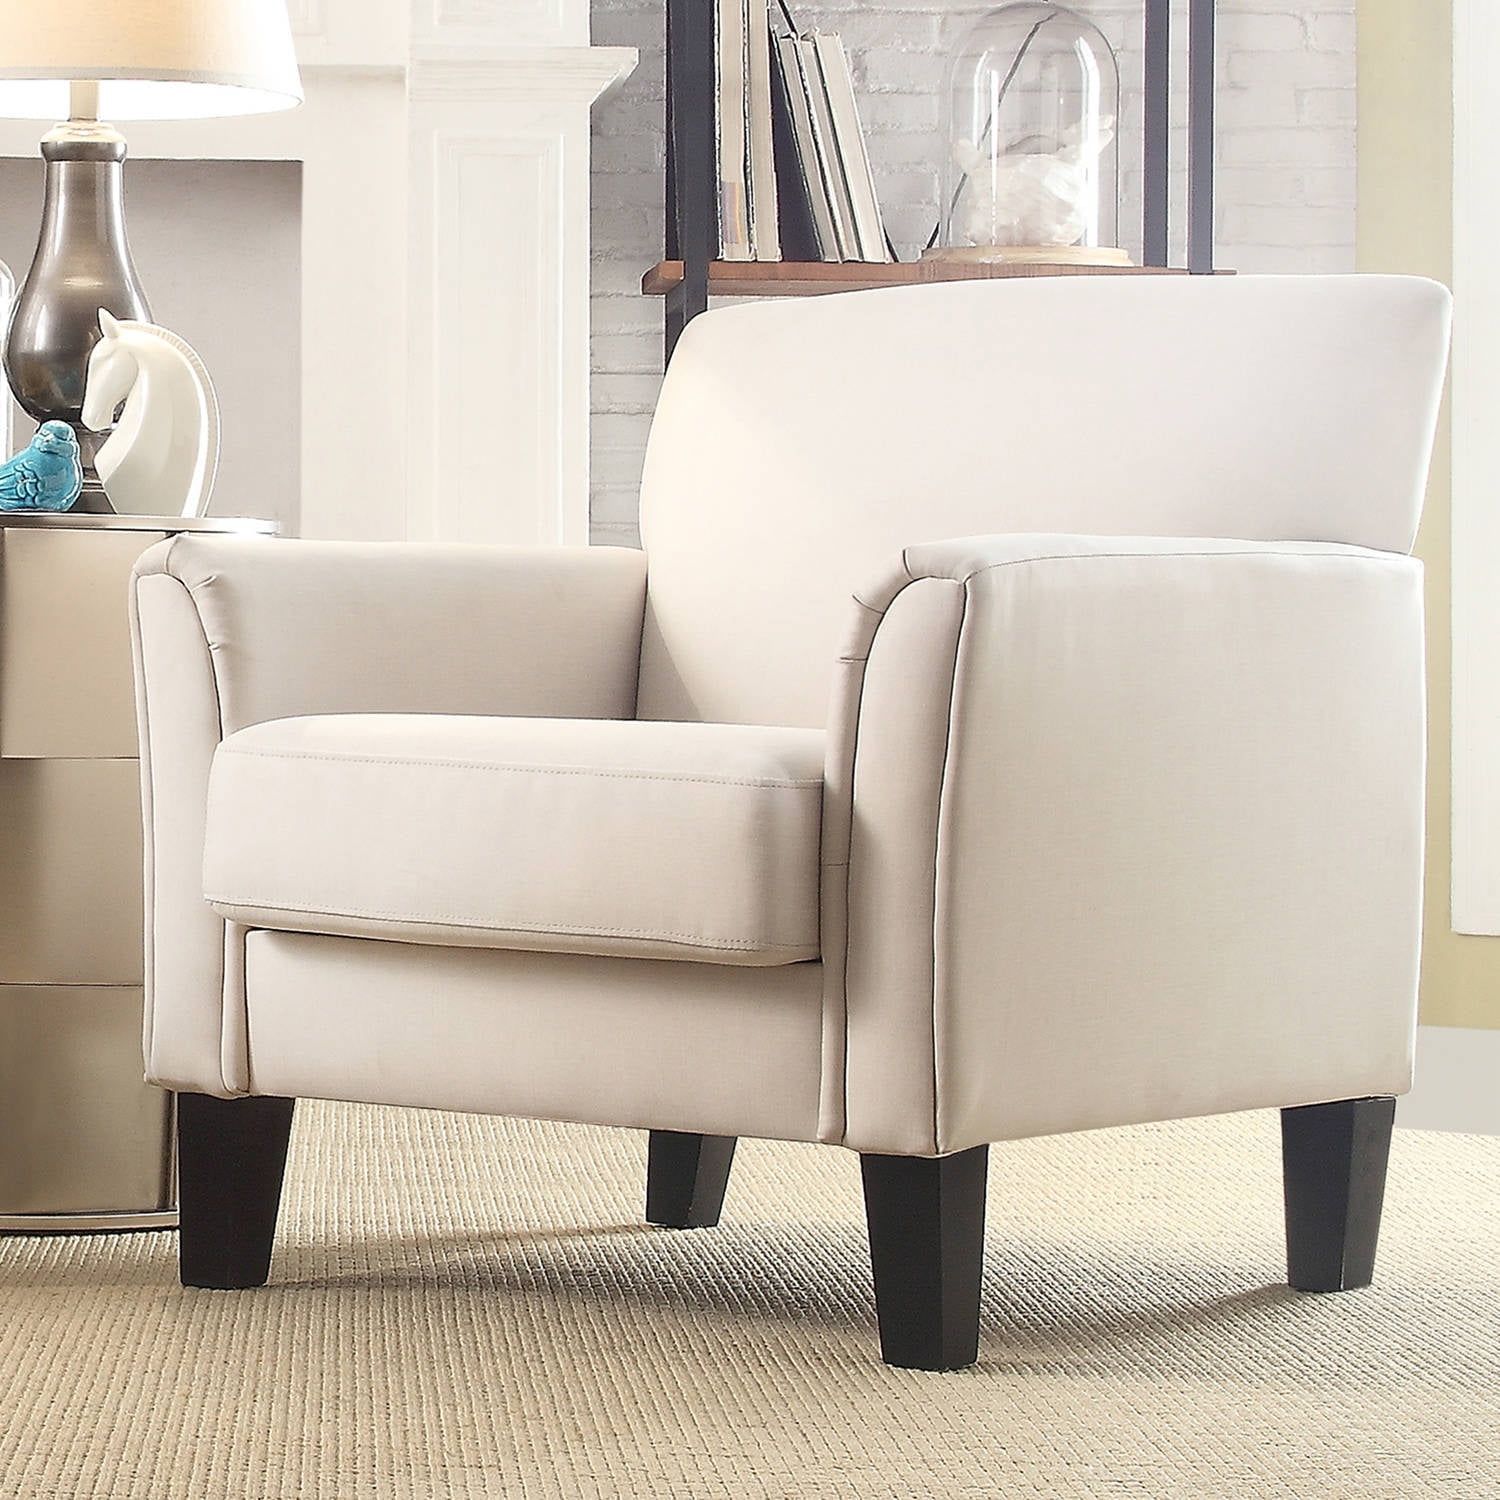 Weston Home Tribeca Living Room Upholstered Accent Chair, Cream White